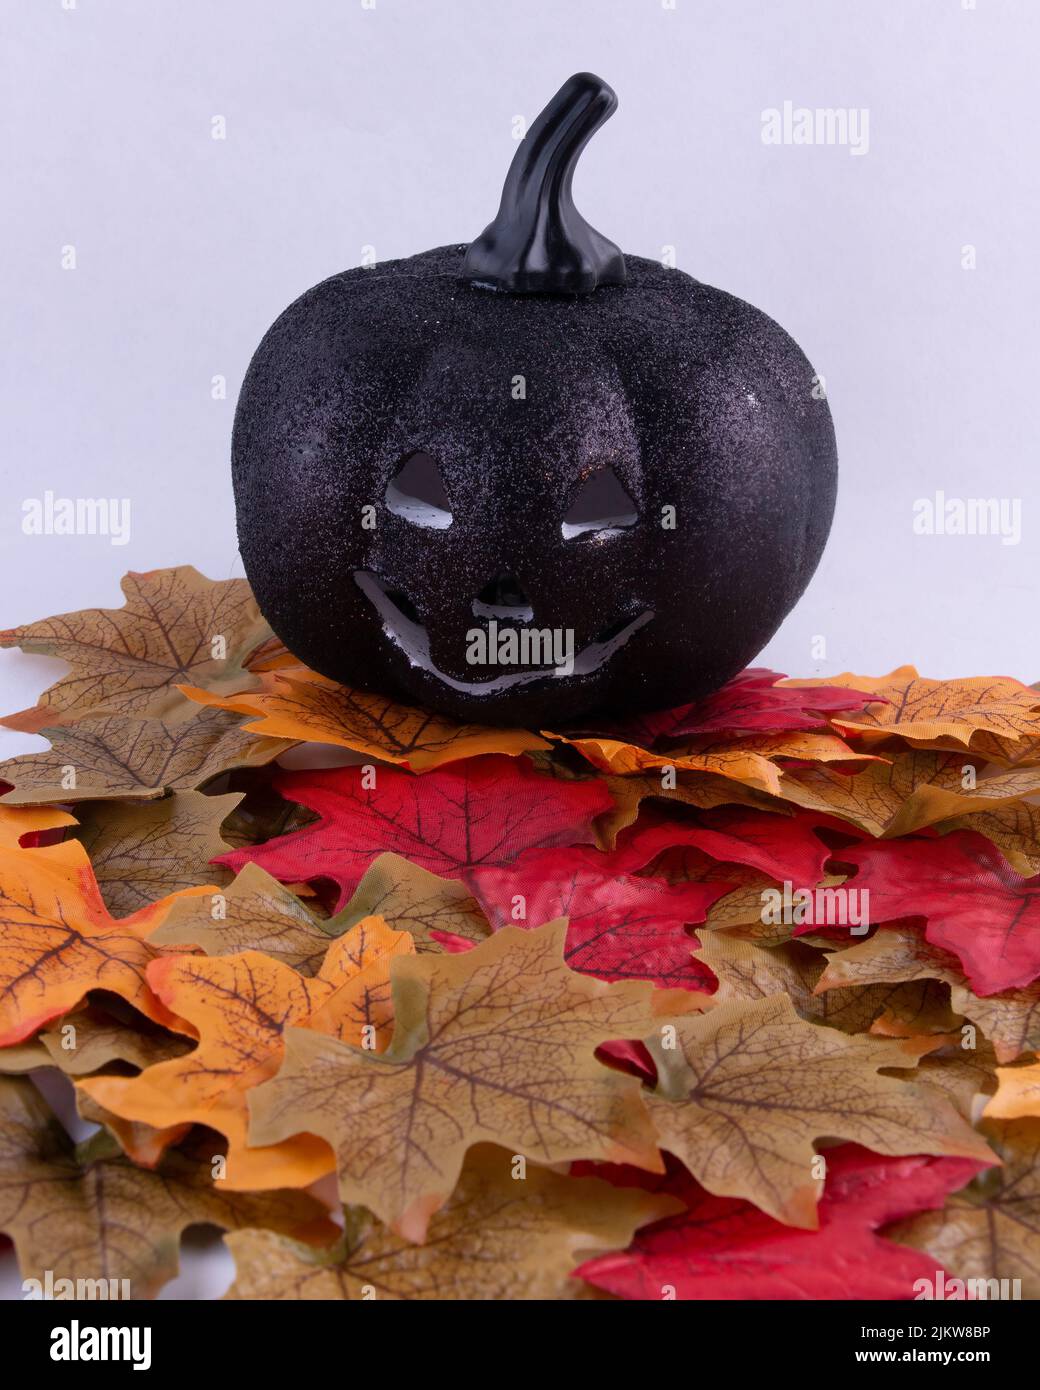 An evil grinning black pumpkin on colorful autumn leaves isolated on white background Stock Photo